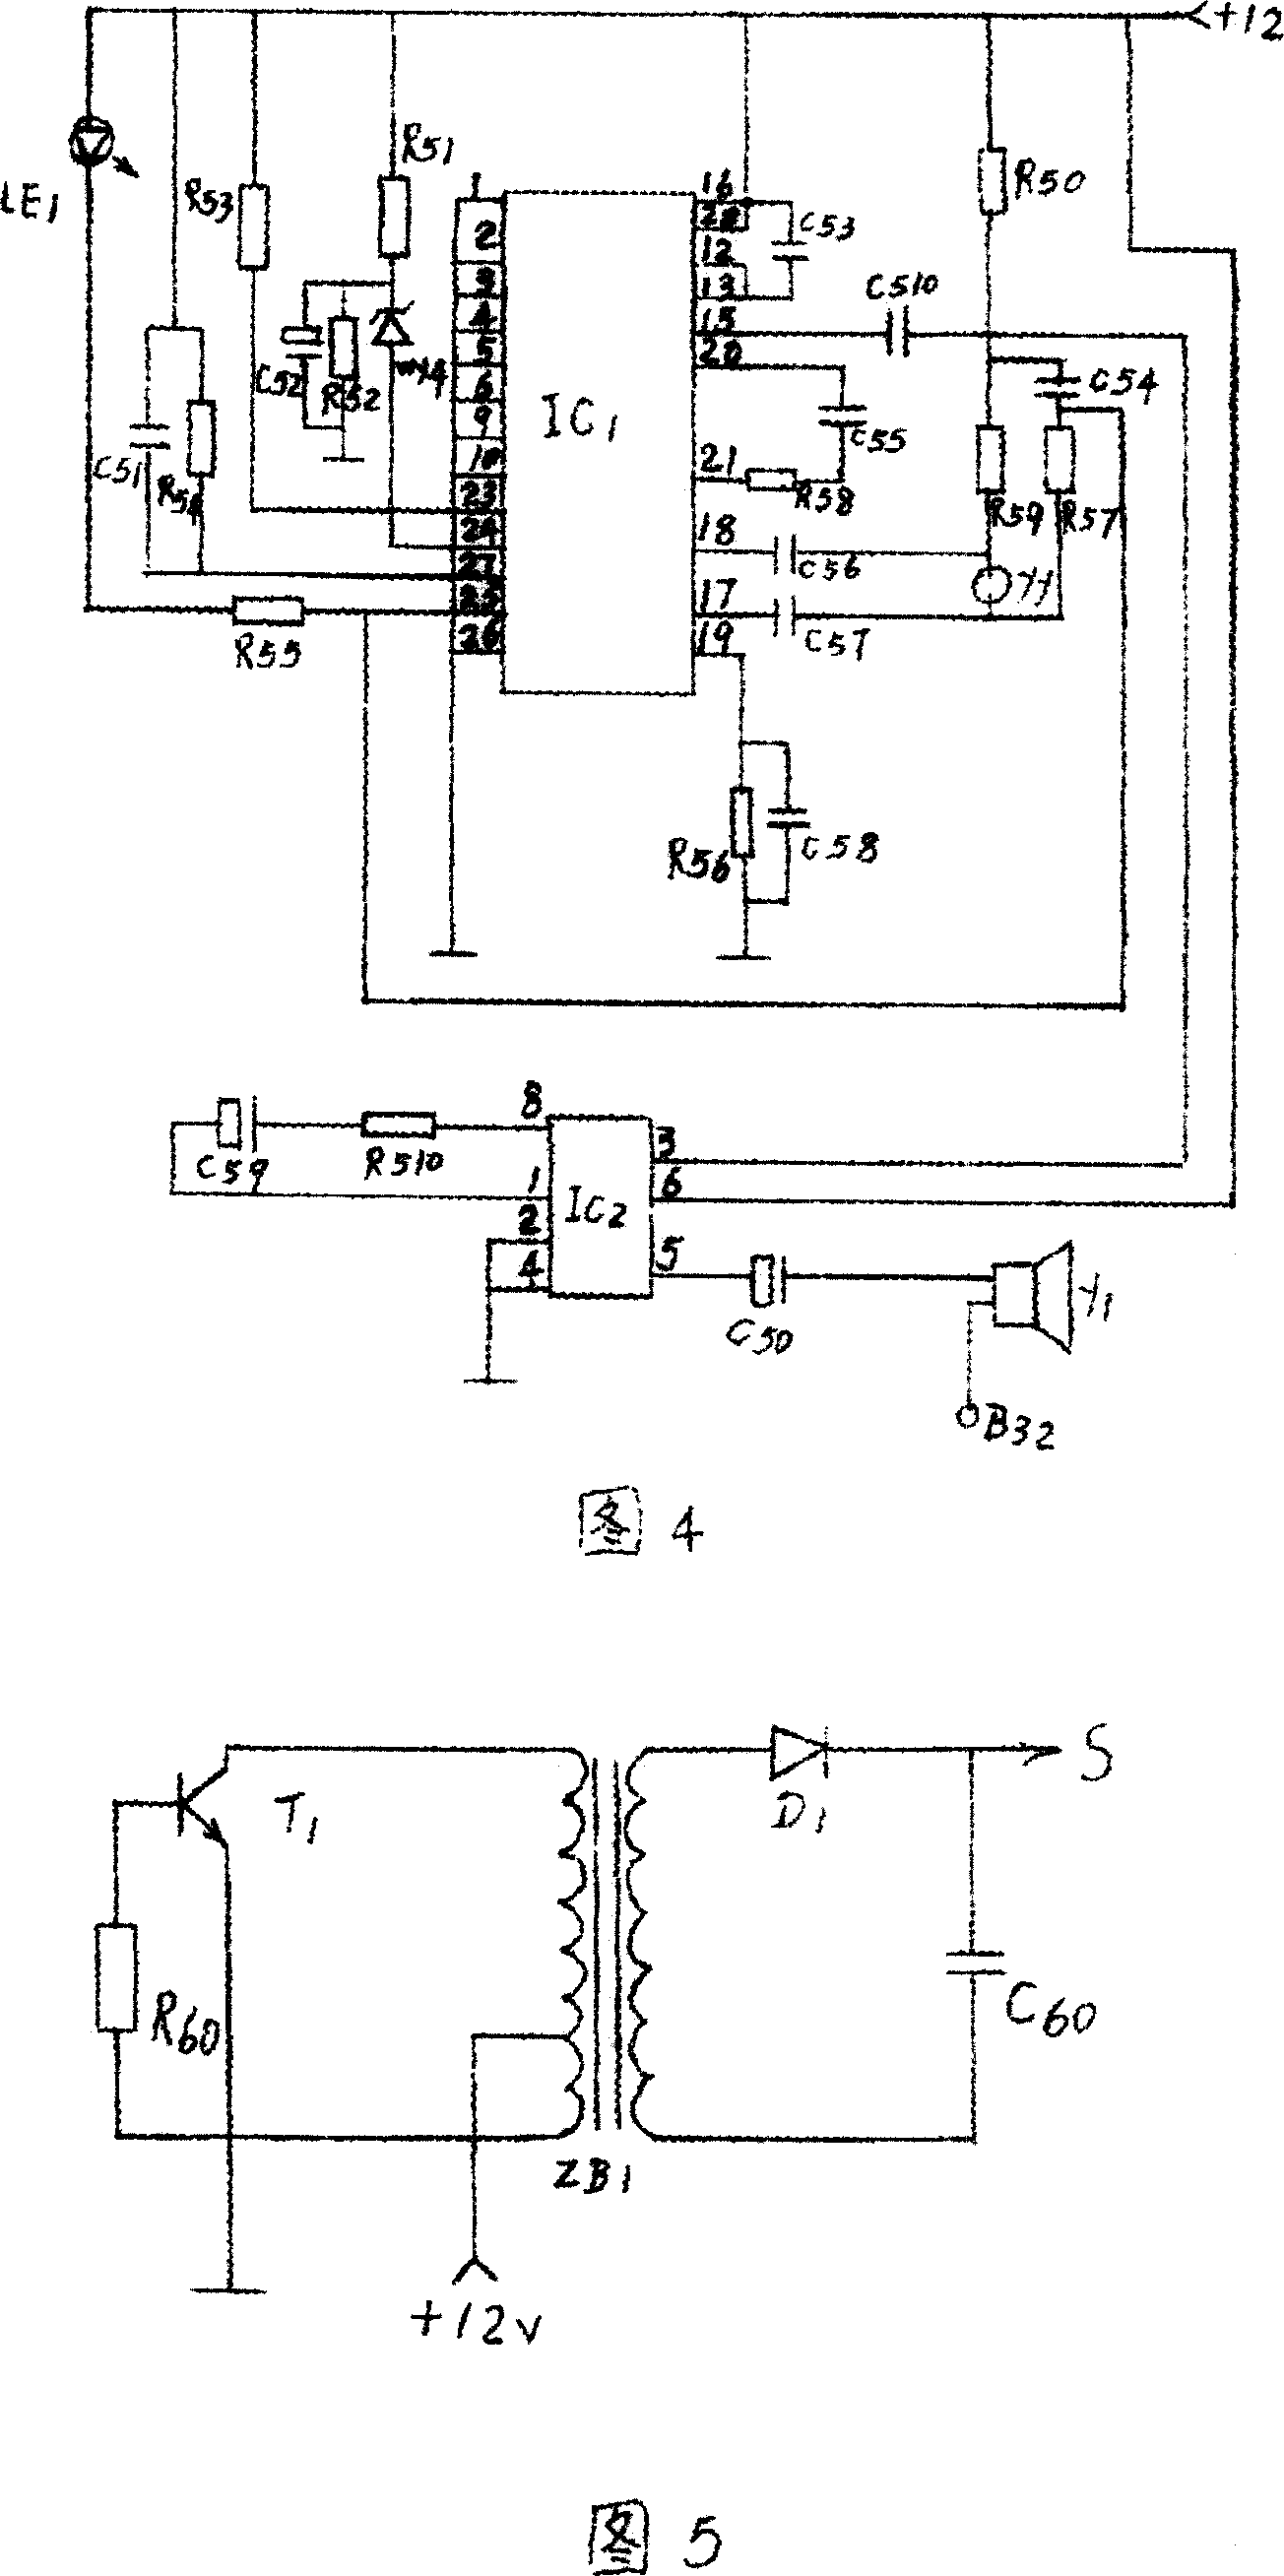 Automatic management device for unlawful using electric in electric network